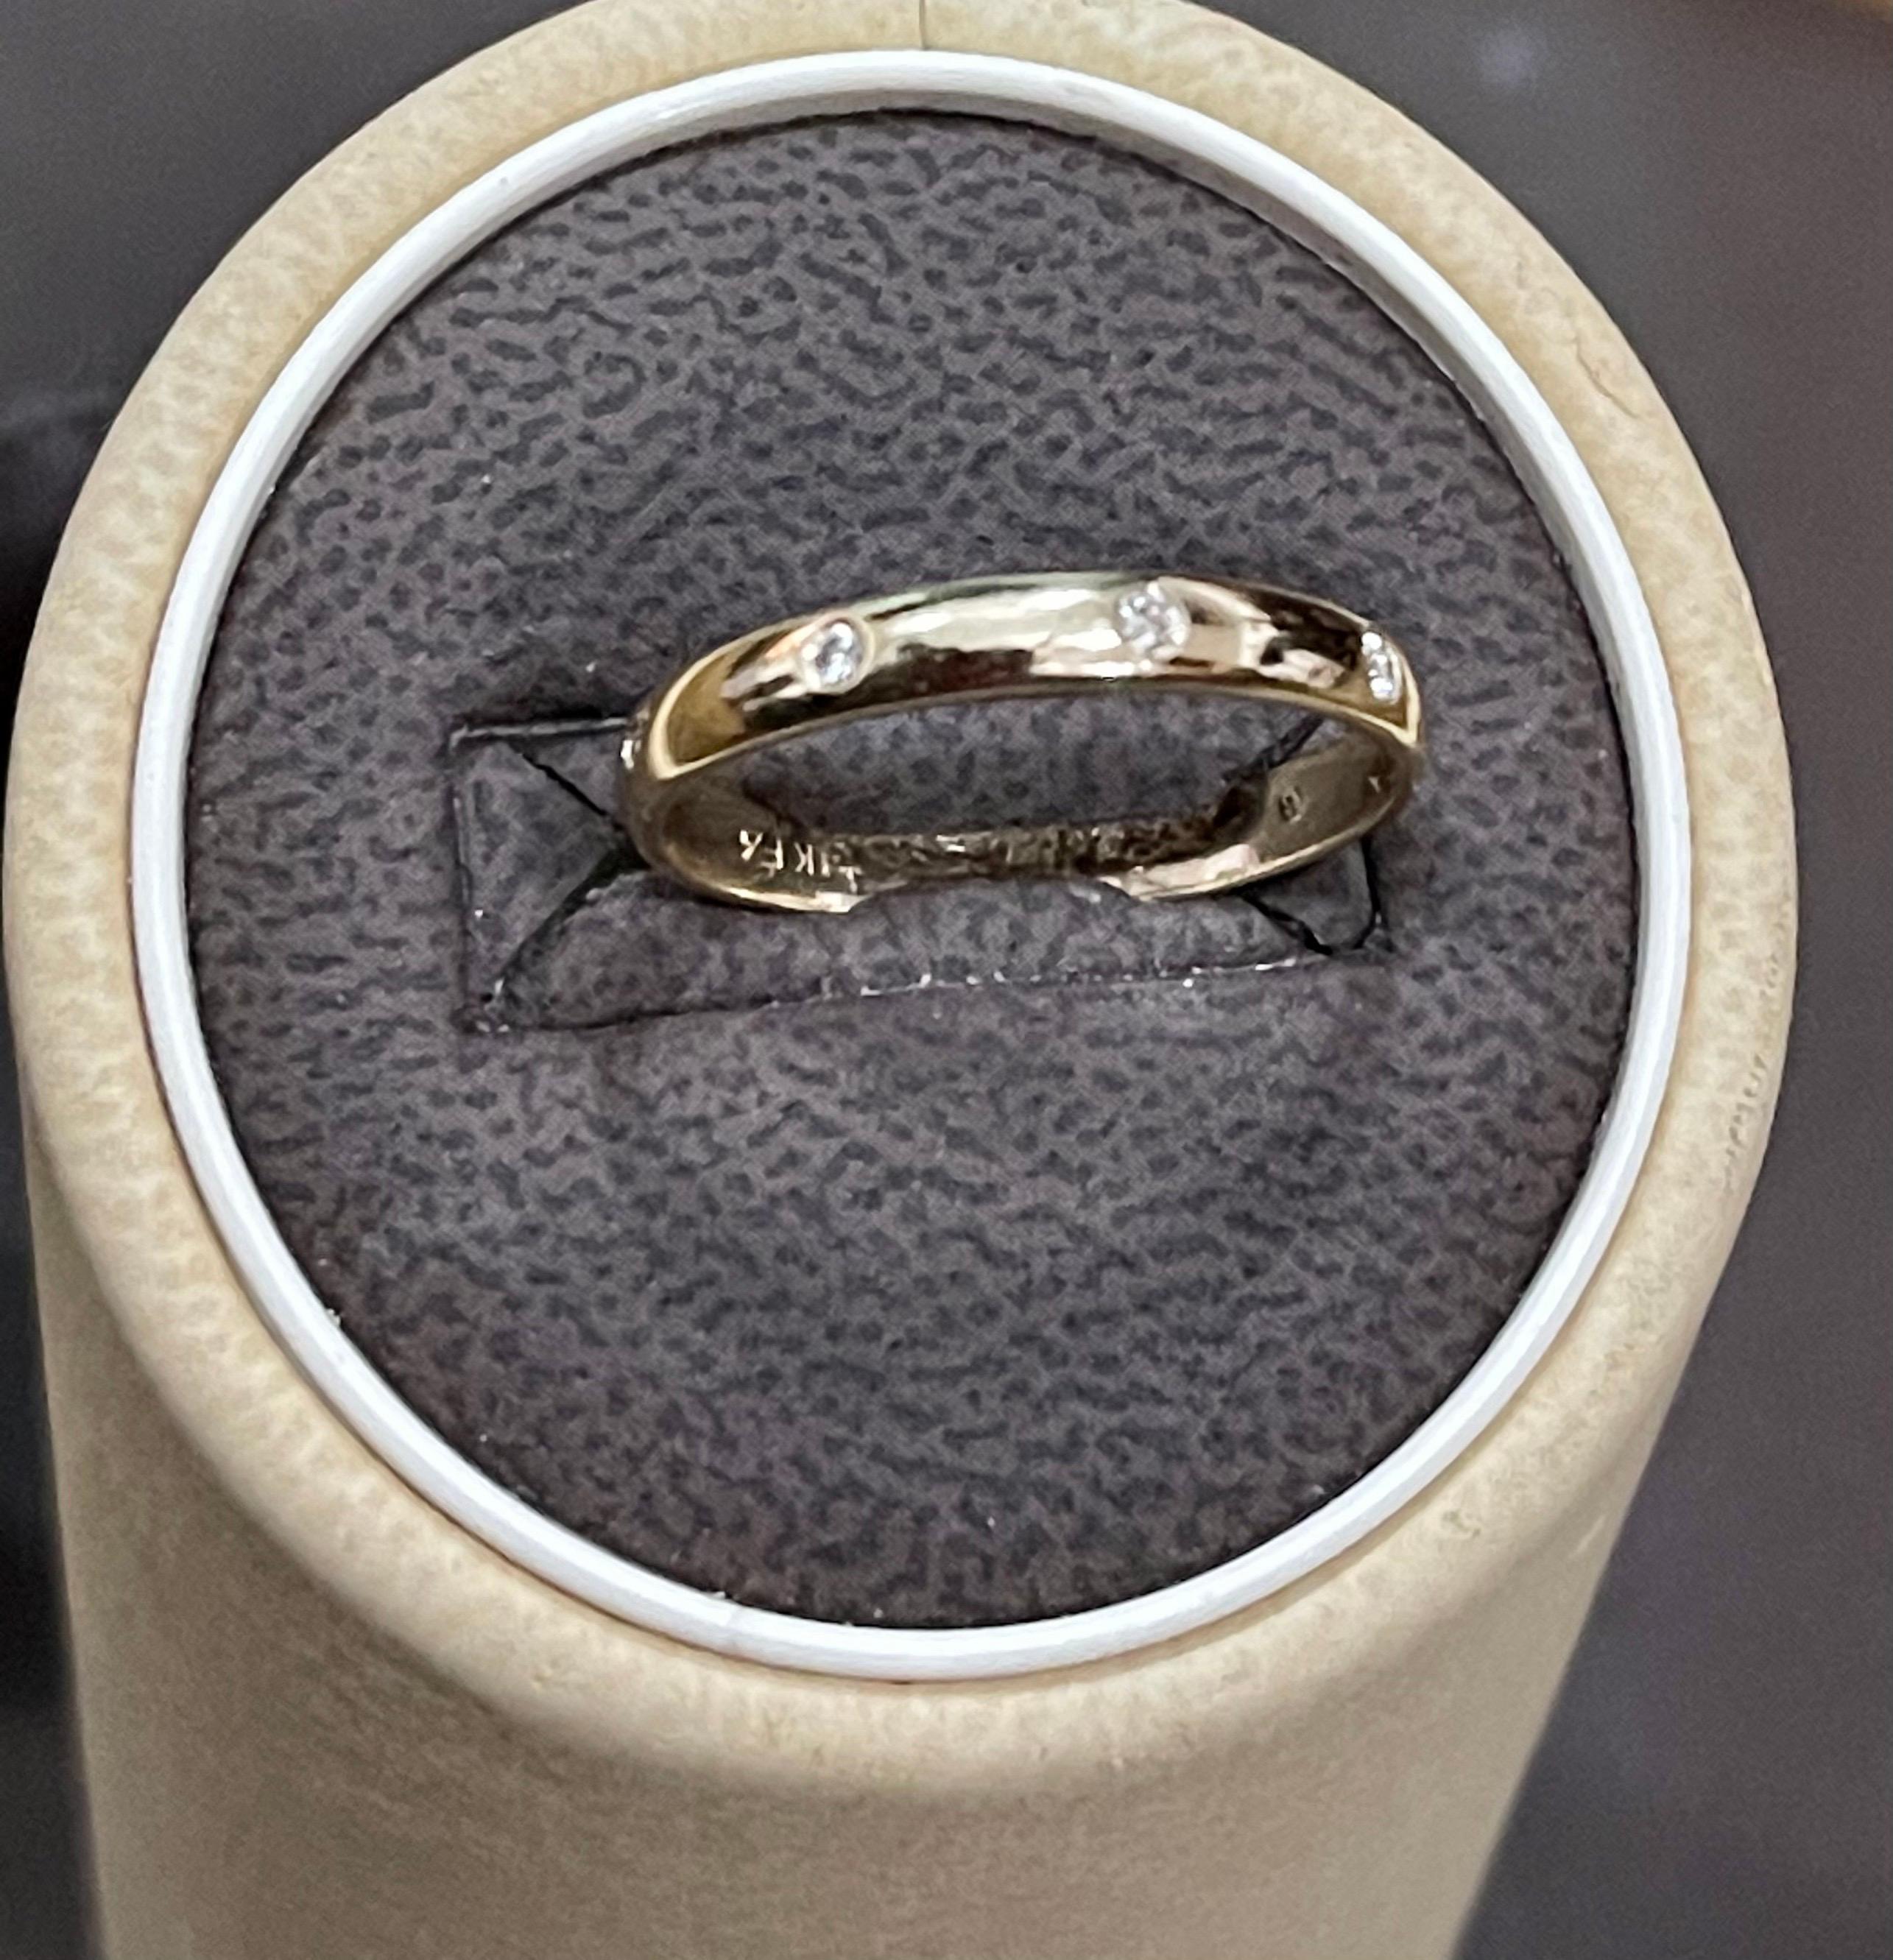 6 Flush Set Bezel Diamond Eternity Wedding Band in 14 Karat Yellow Gold In Excellent Condition For Sale In New York, NY